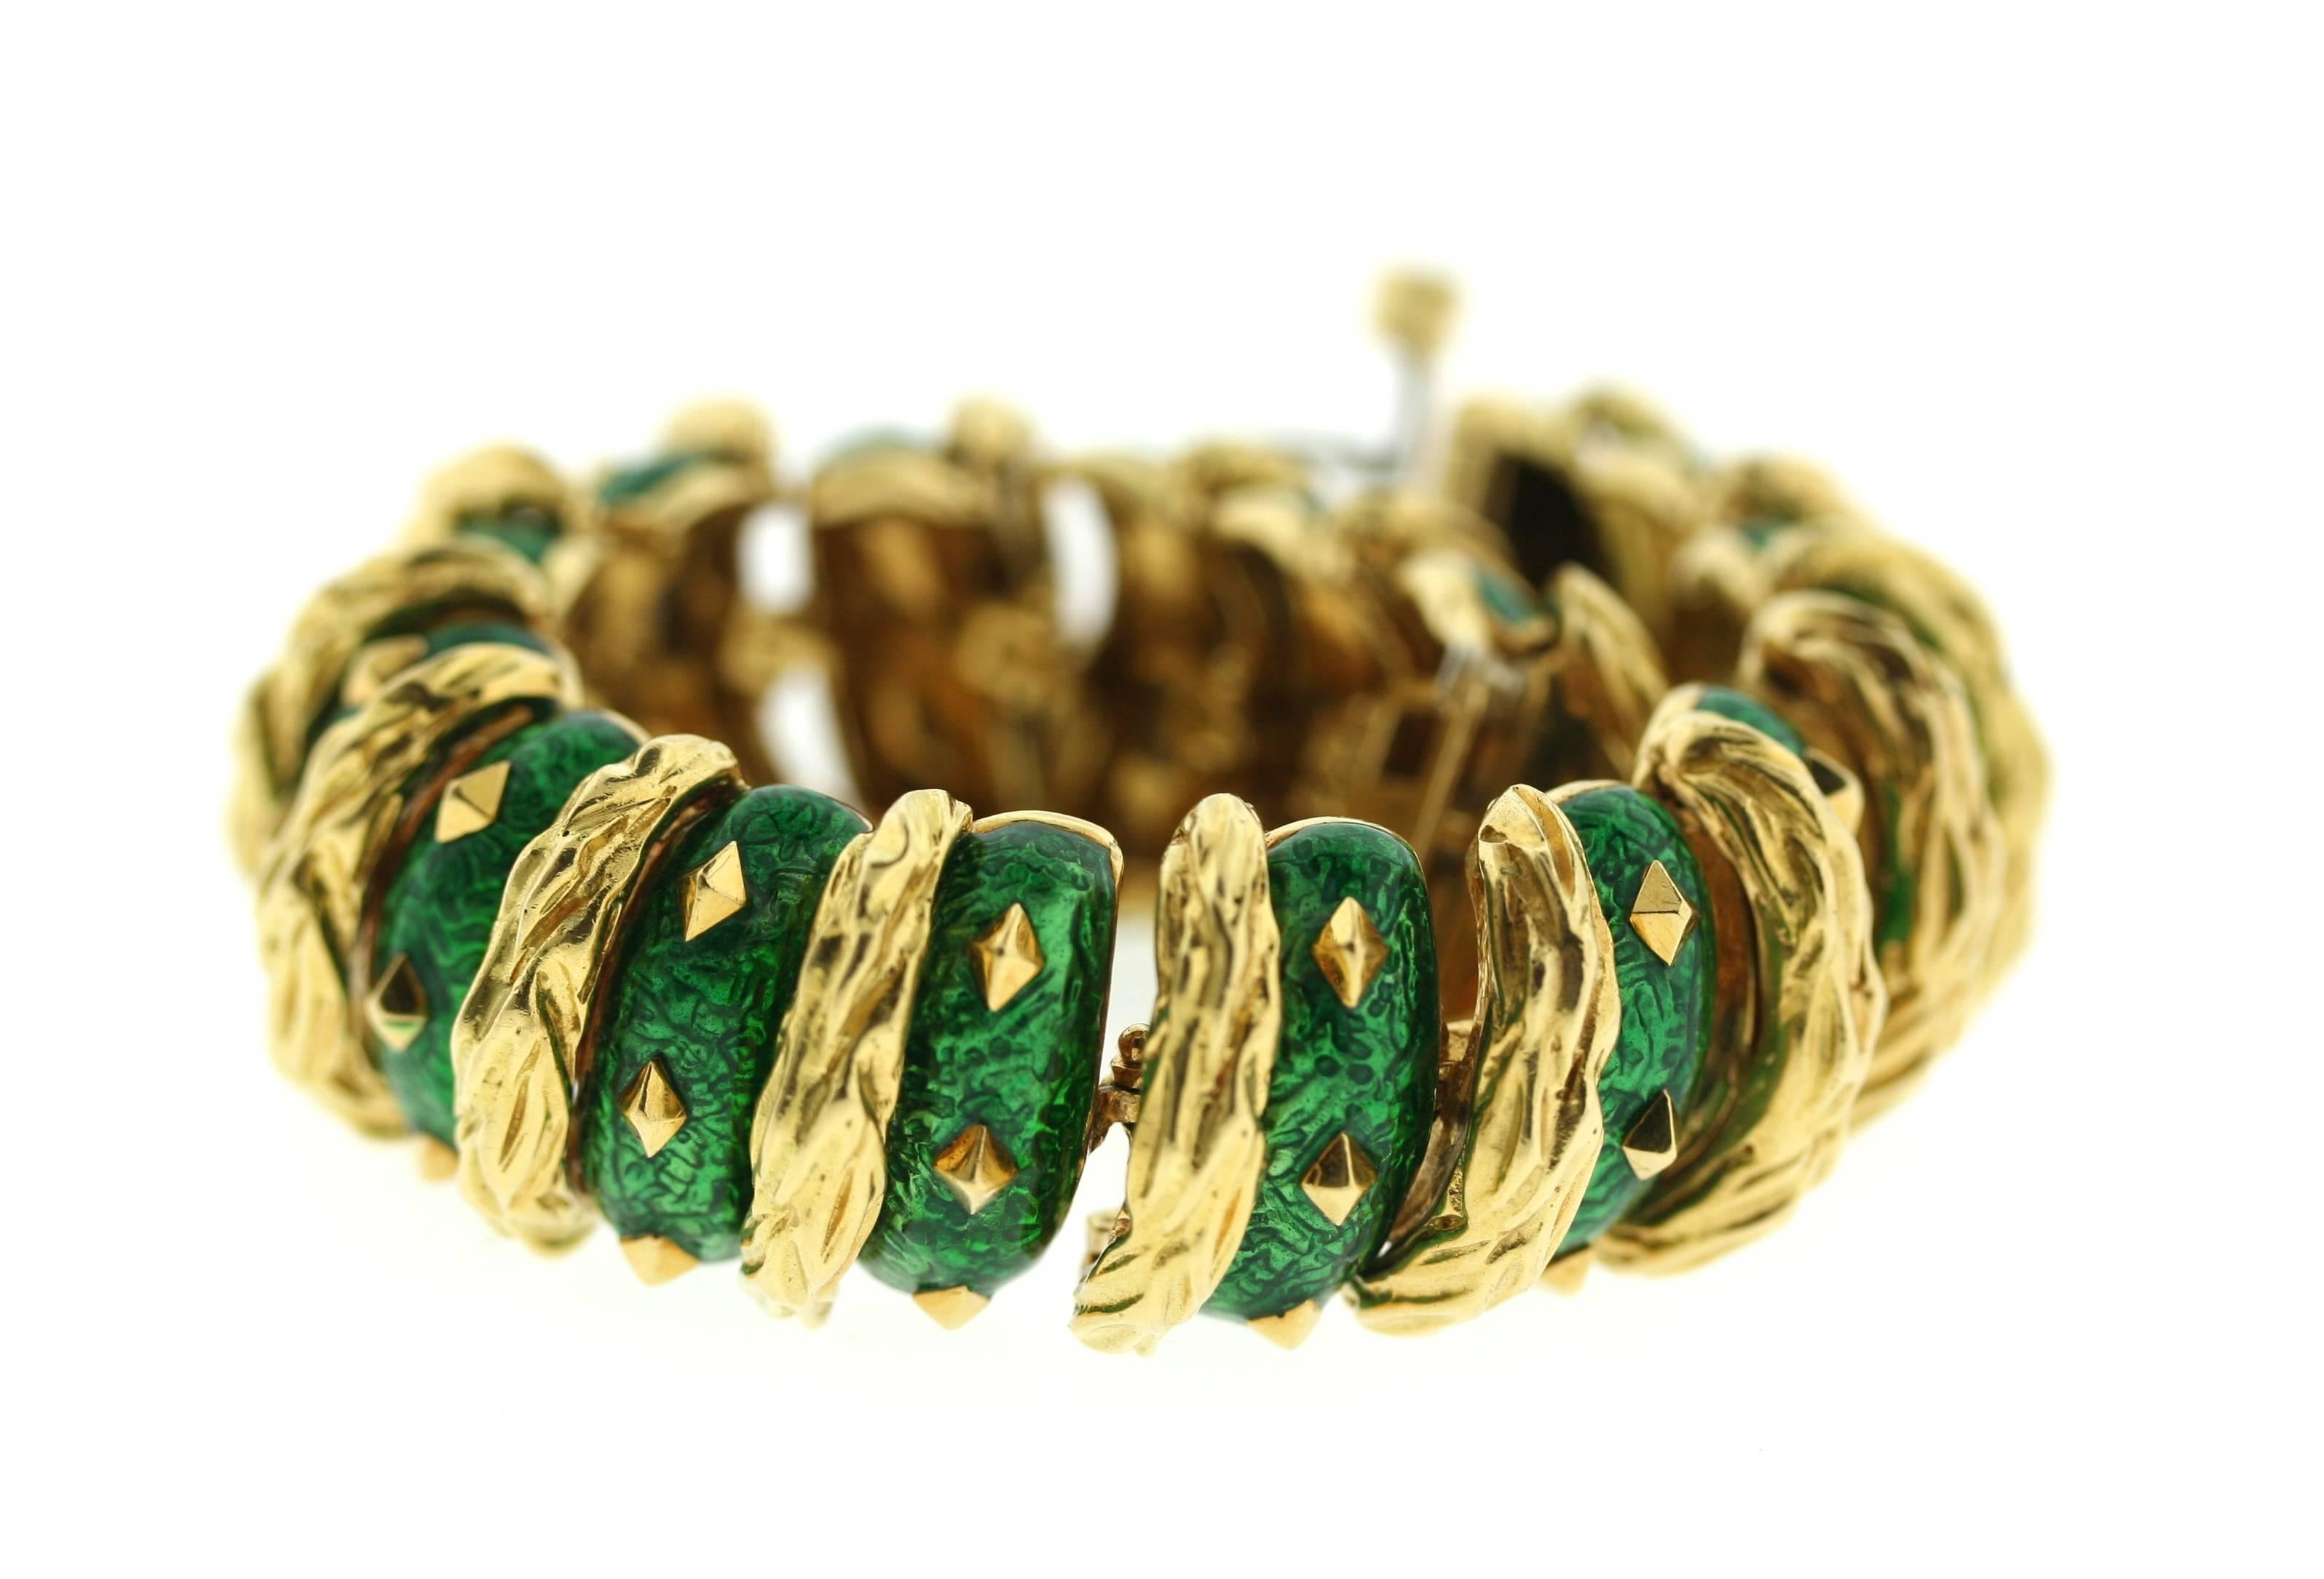 David Webb 18k gold bracelet with emerald green enameled links. Each link is set with diamond-shaped gold studs and separated by elongated sections of textured gold. When fastened the bracelet takes on the form of a semi rigid bangle which molds to